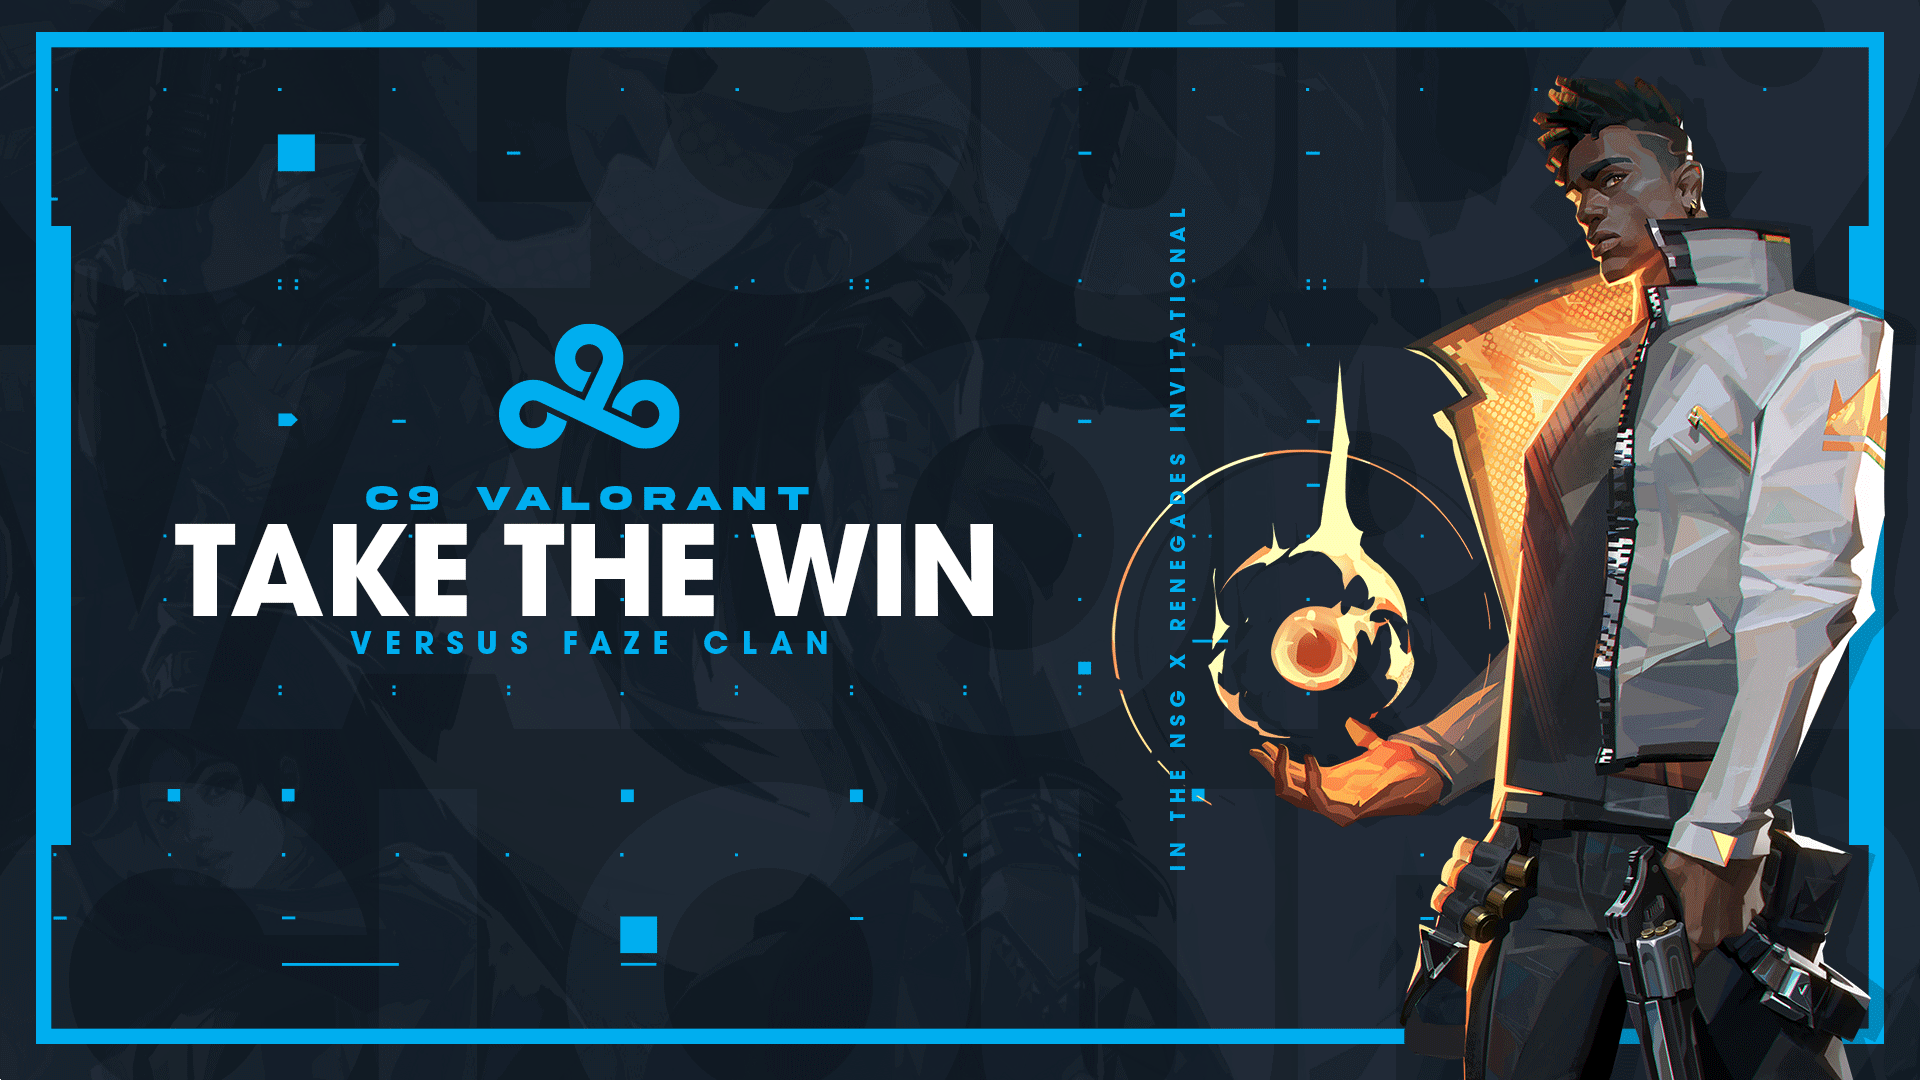 Cloud9 on X: #C9VAL take the 13-8 on Bind to take the 2-0 #C9WIN over  @FaZeClan in the @Renegades x @nerdstgamers VALORANT Invitational! #GGWP  They'll be back for their semifinals match later